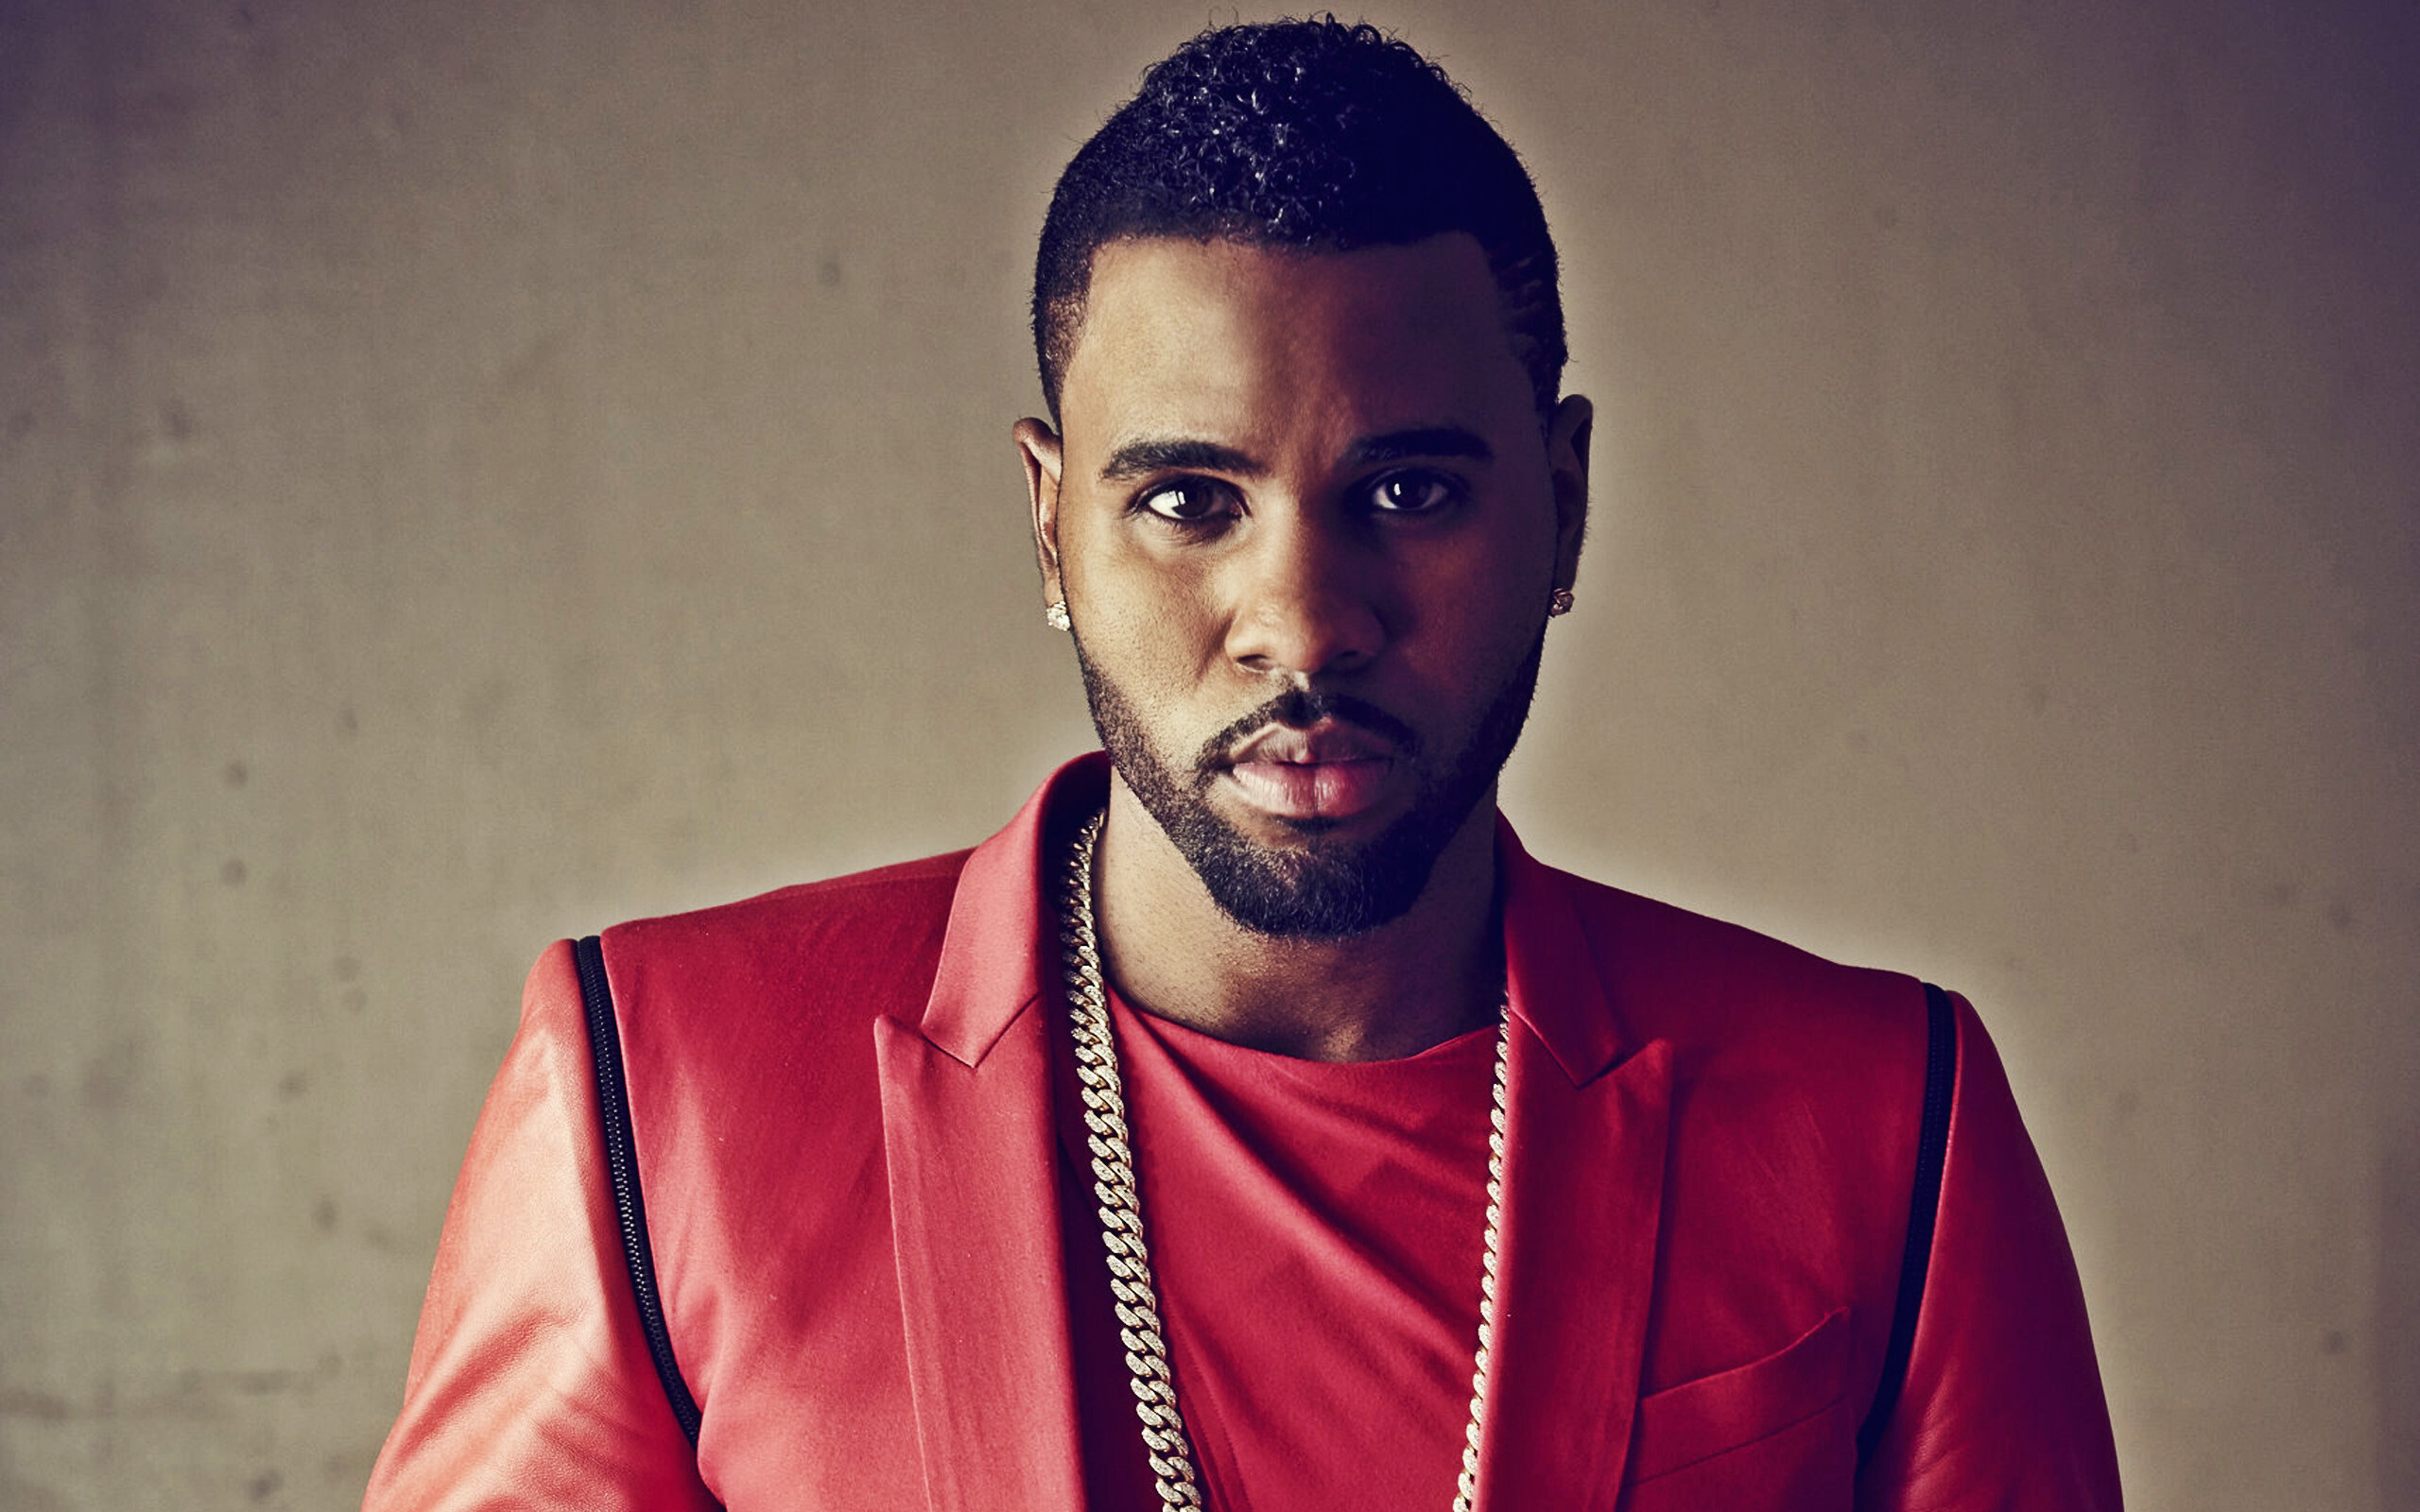 Jason Derulo: "Don't Wanna Go Home" peaked at number 14 on the US Billboard Hot 100. 2560x1600 HD Background.